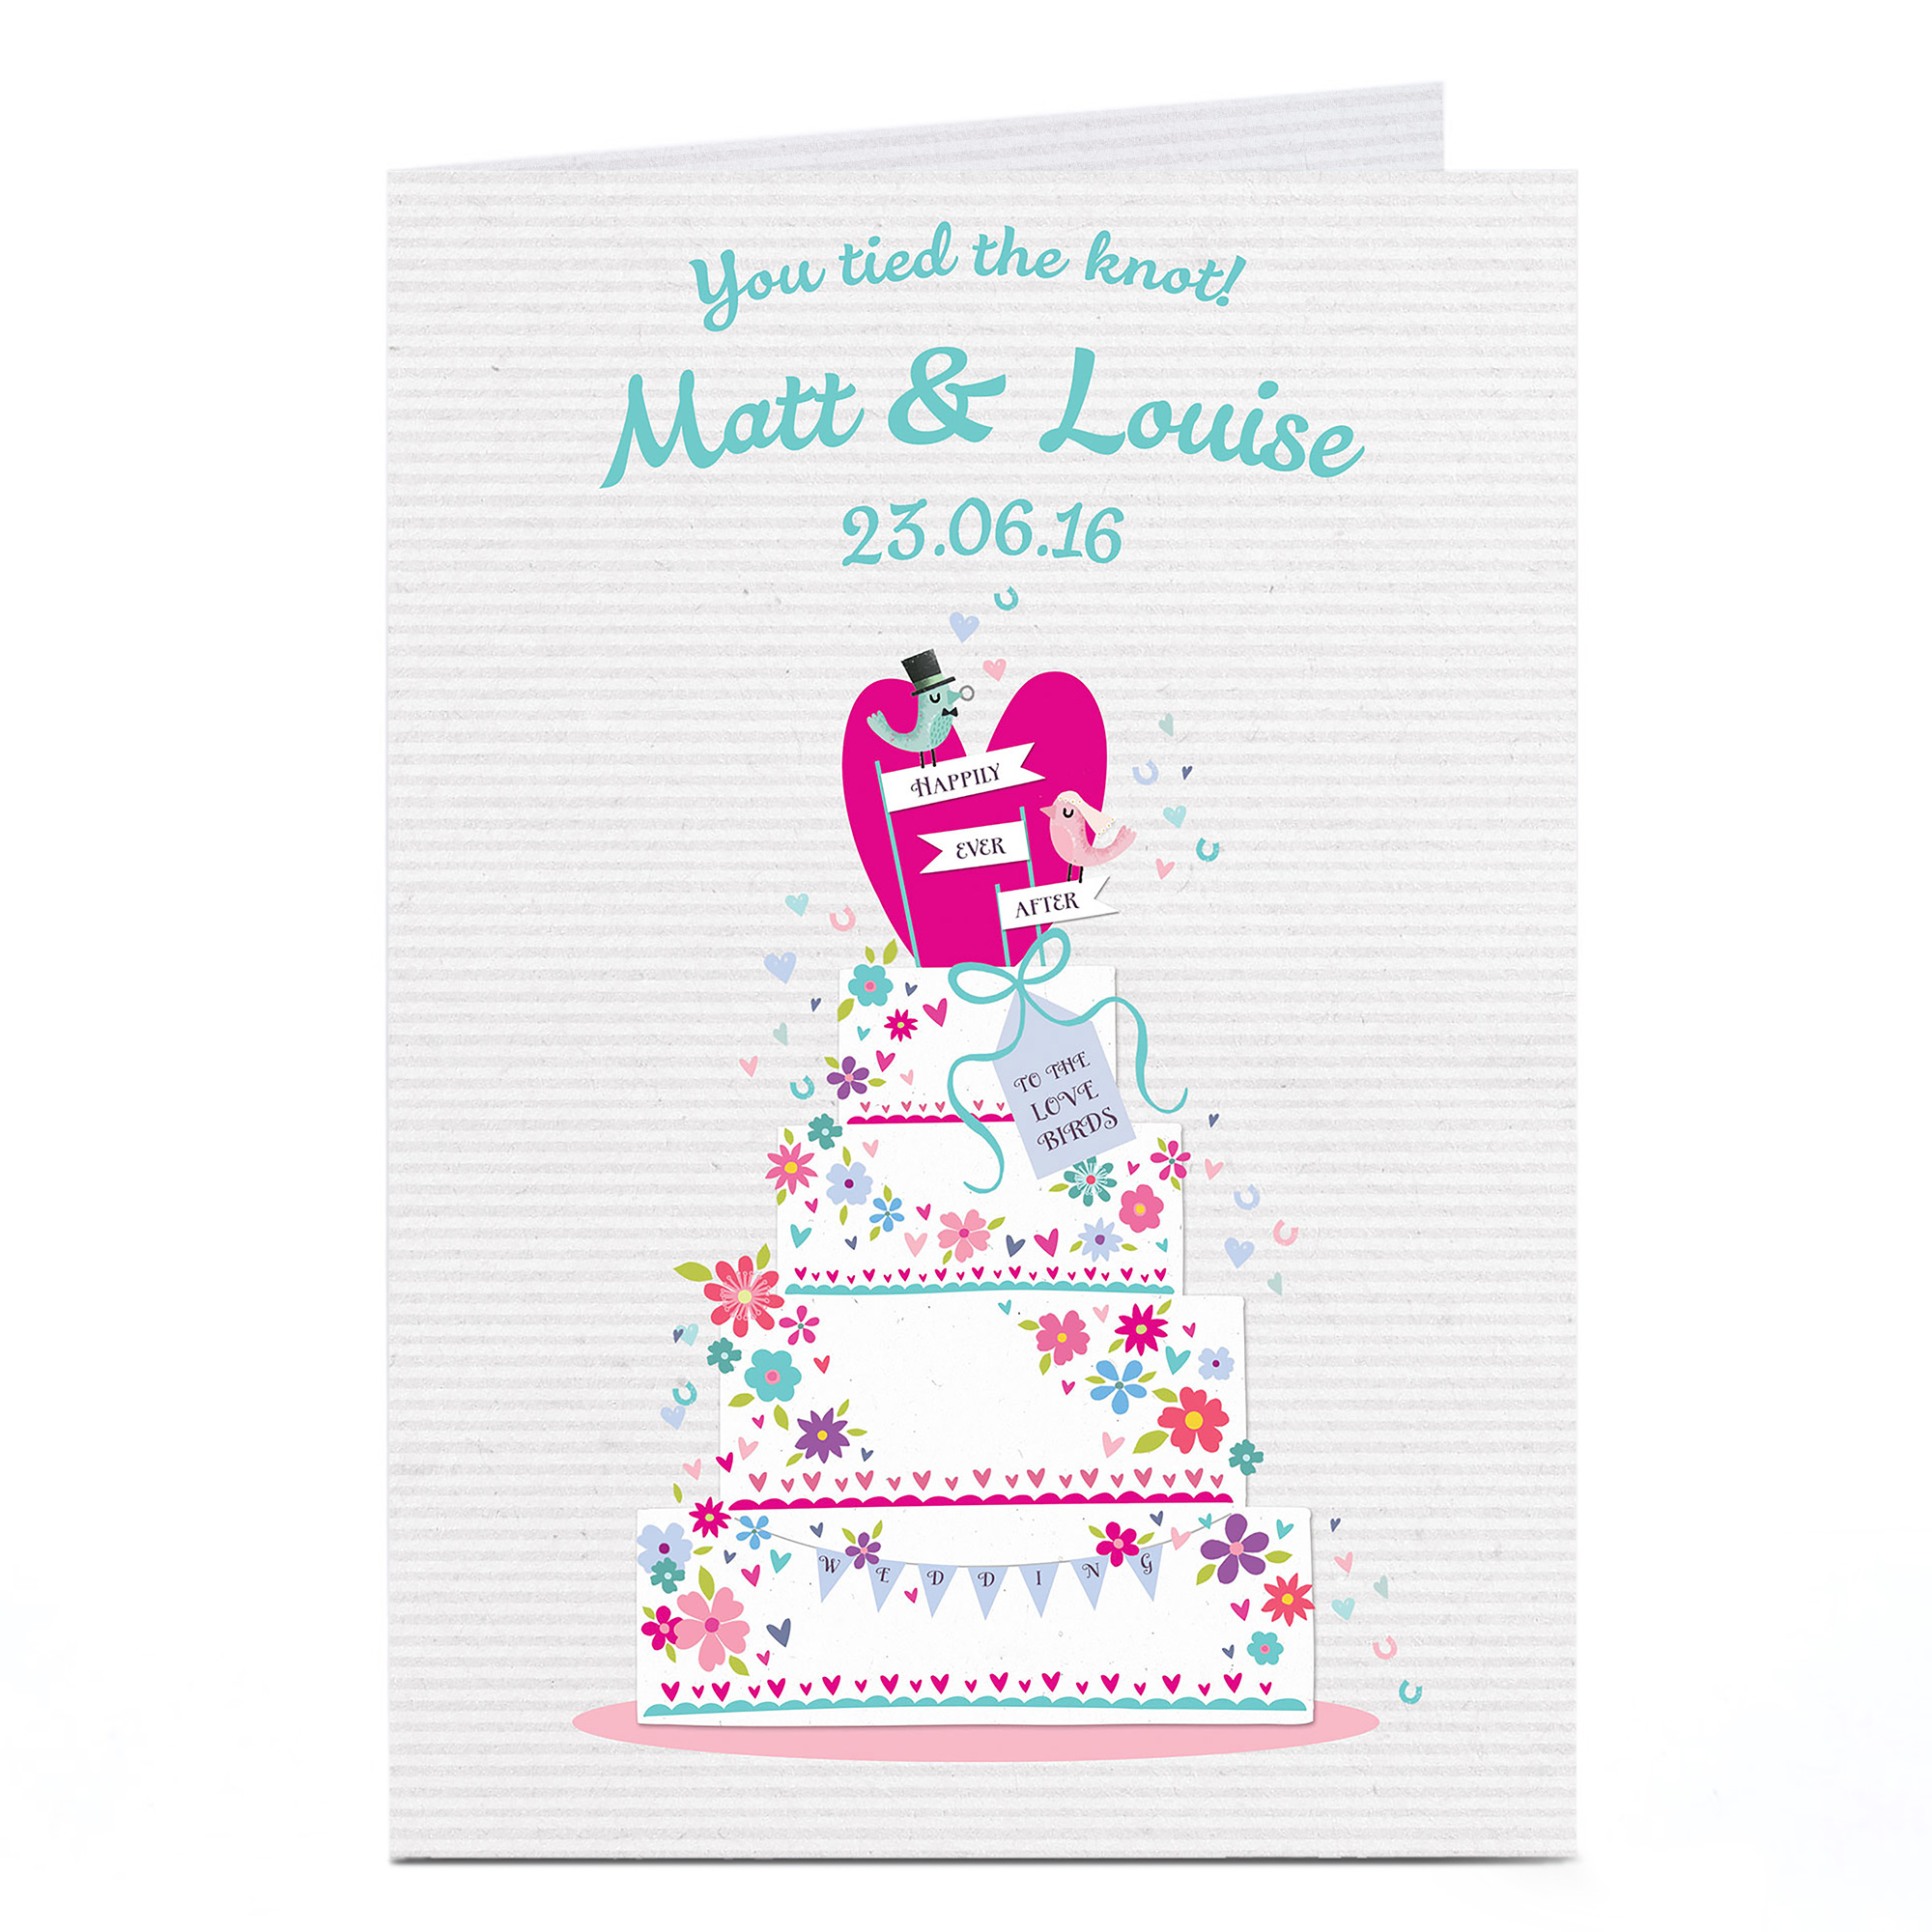 Personalised Wedding Card - Happily Ever After